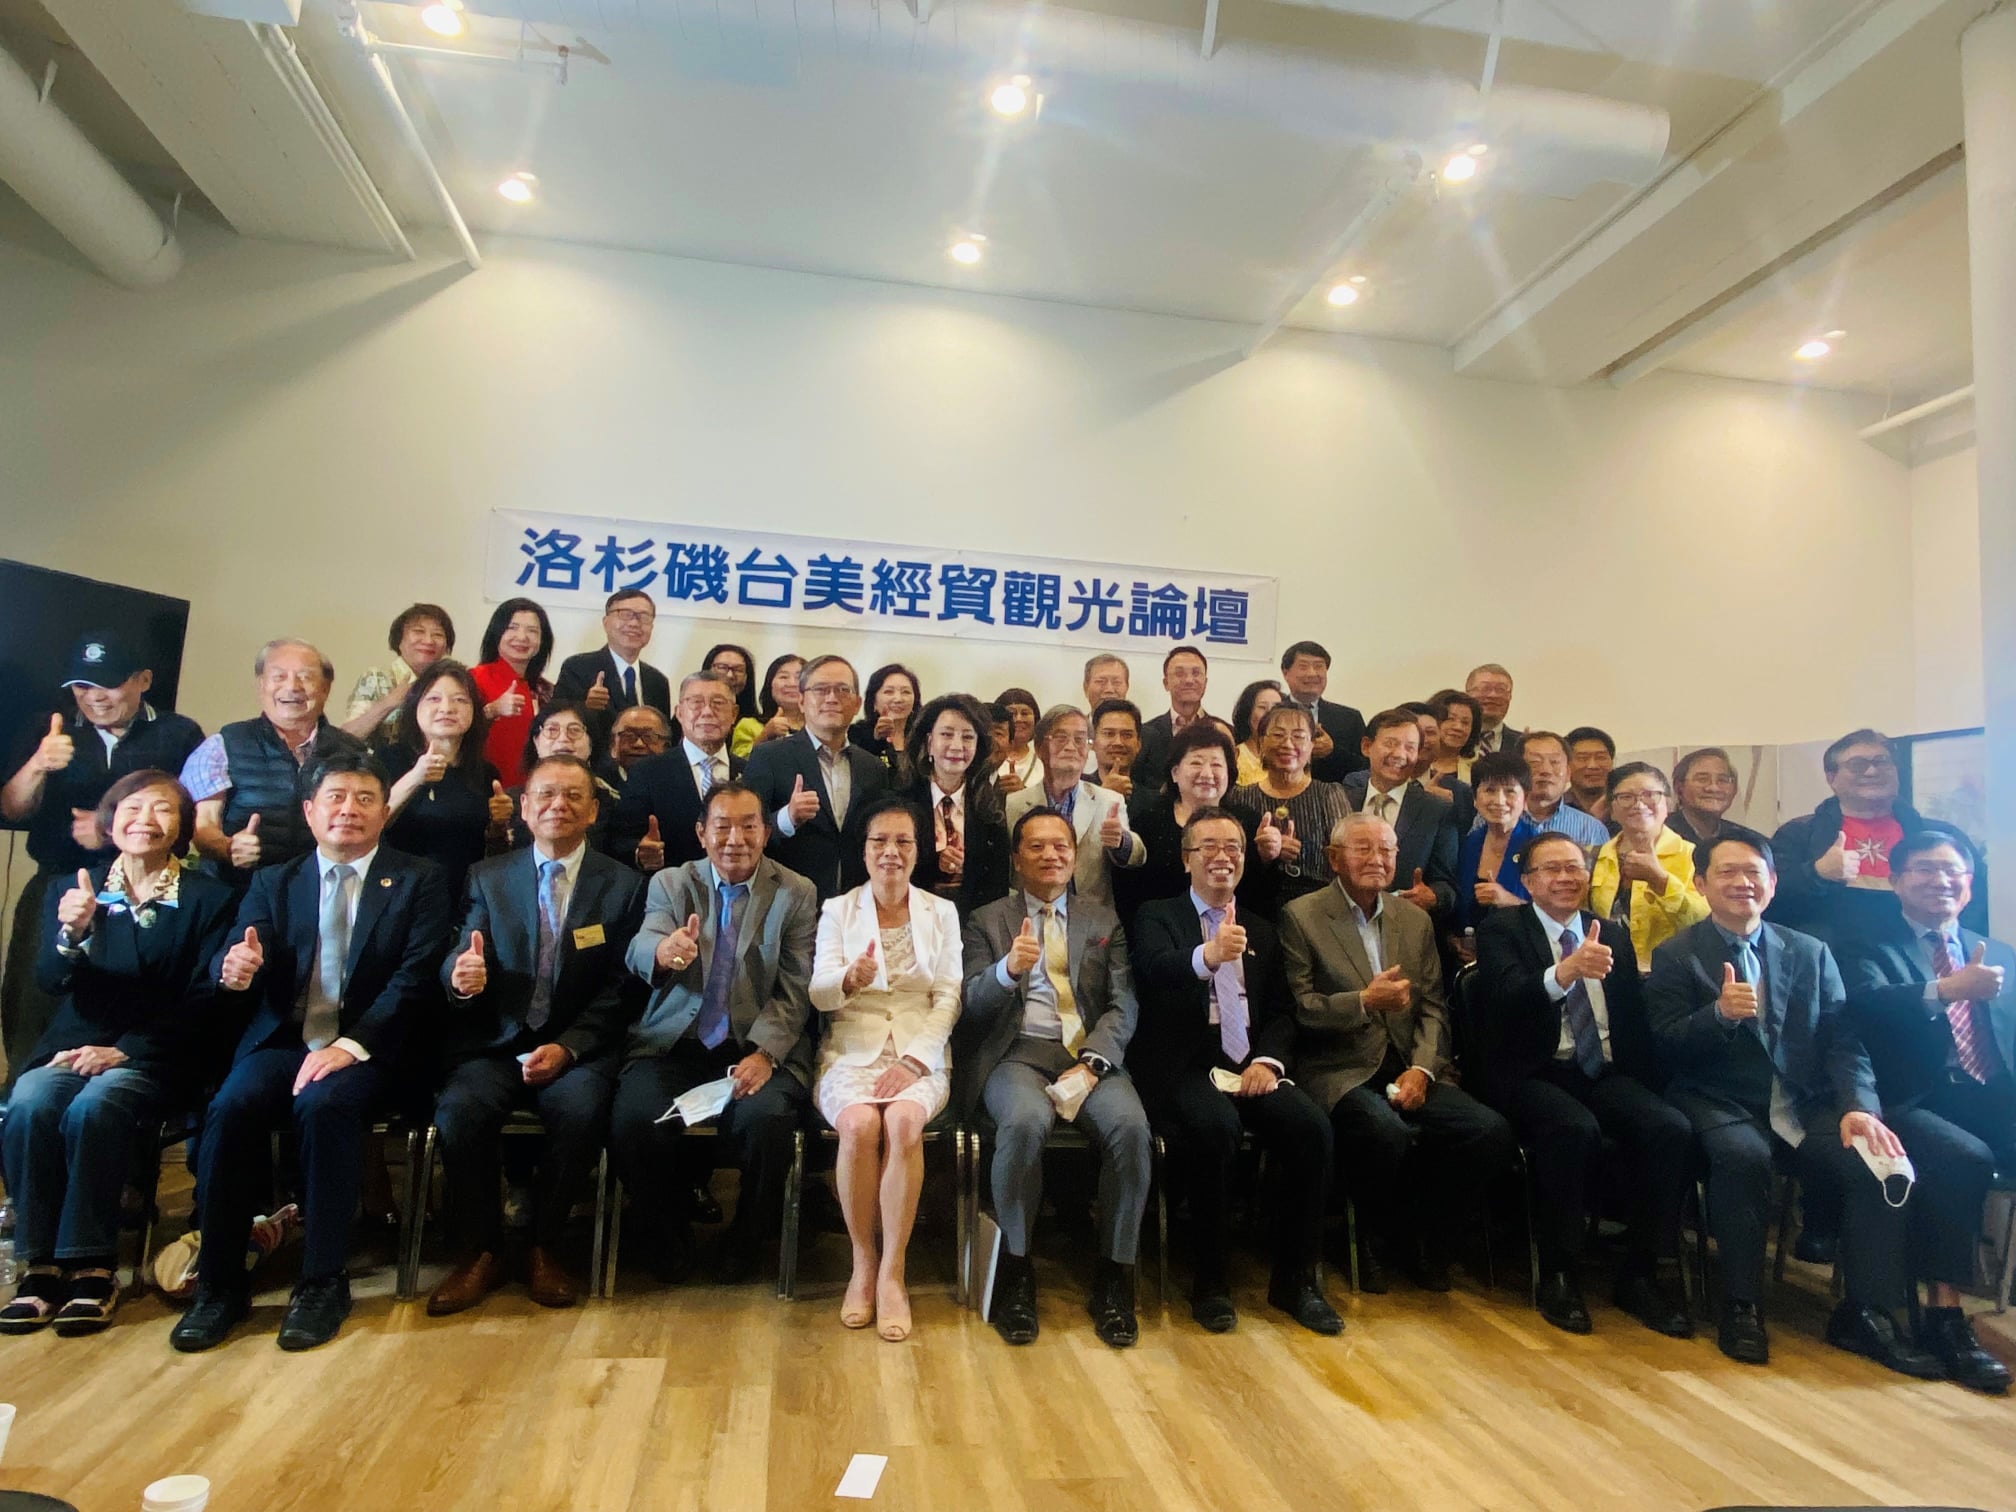 More than 50 leaders of the overseas Chinese community in Los Angeles attended the Los Angeles Taiwan-US Economic and Trade Tourism Forum hosted by The EPOCH TIMES. (Photo / Retrieved from the Facebook of Taipei Economic and Cultural Office in Los Angeles)